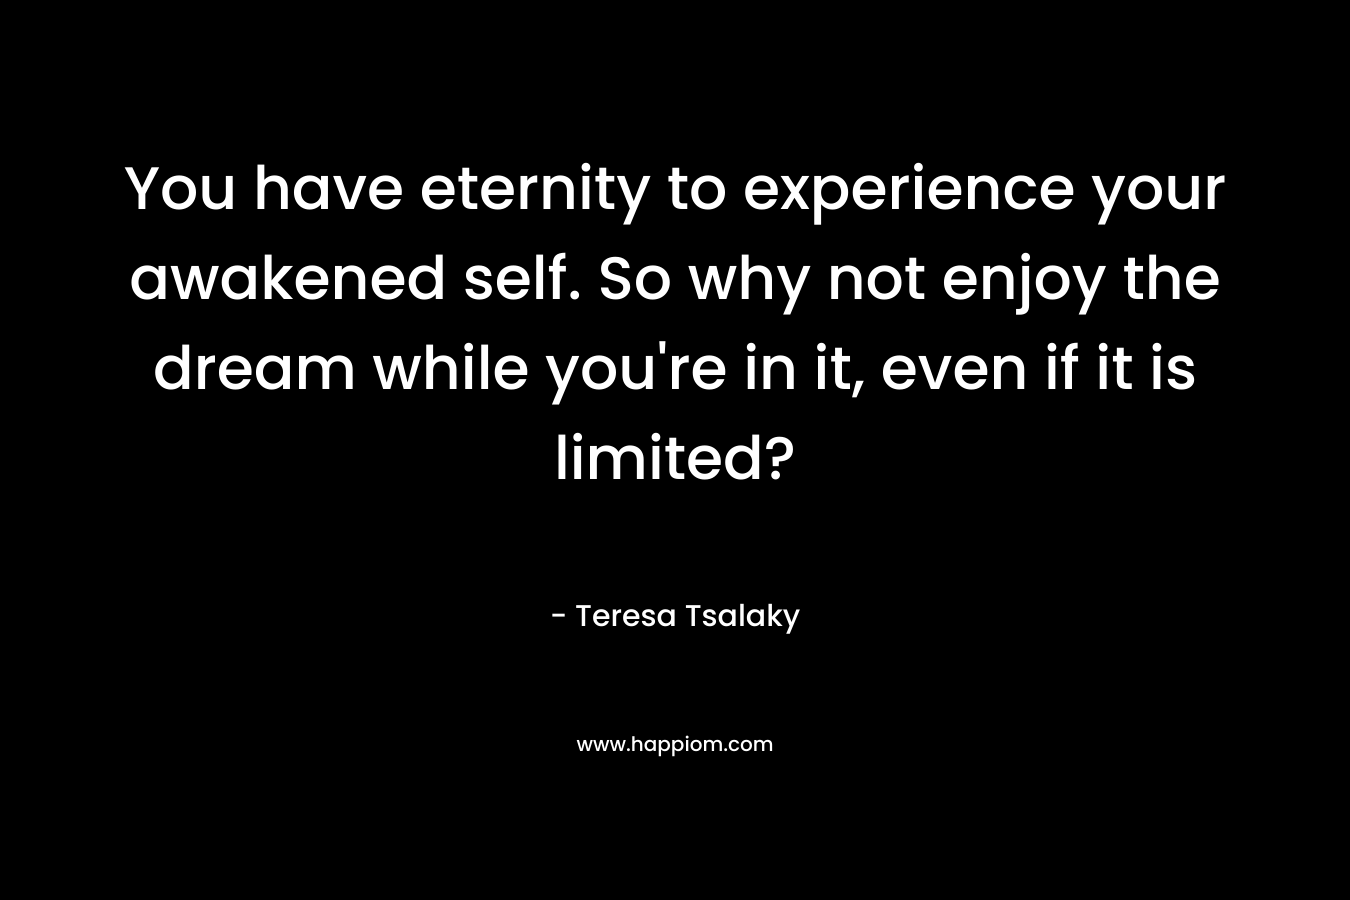 You have eternity to experience your awakened self. So why not enjoy the dream while you're in it, even if it is limited?